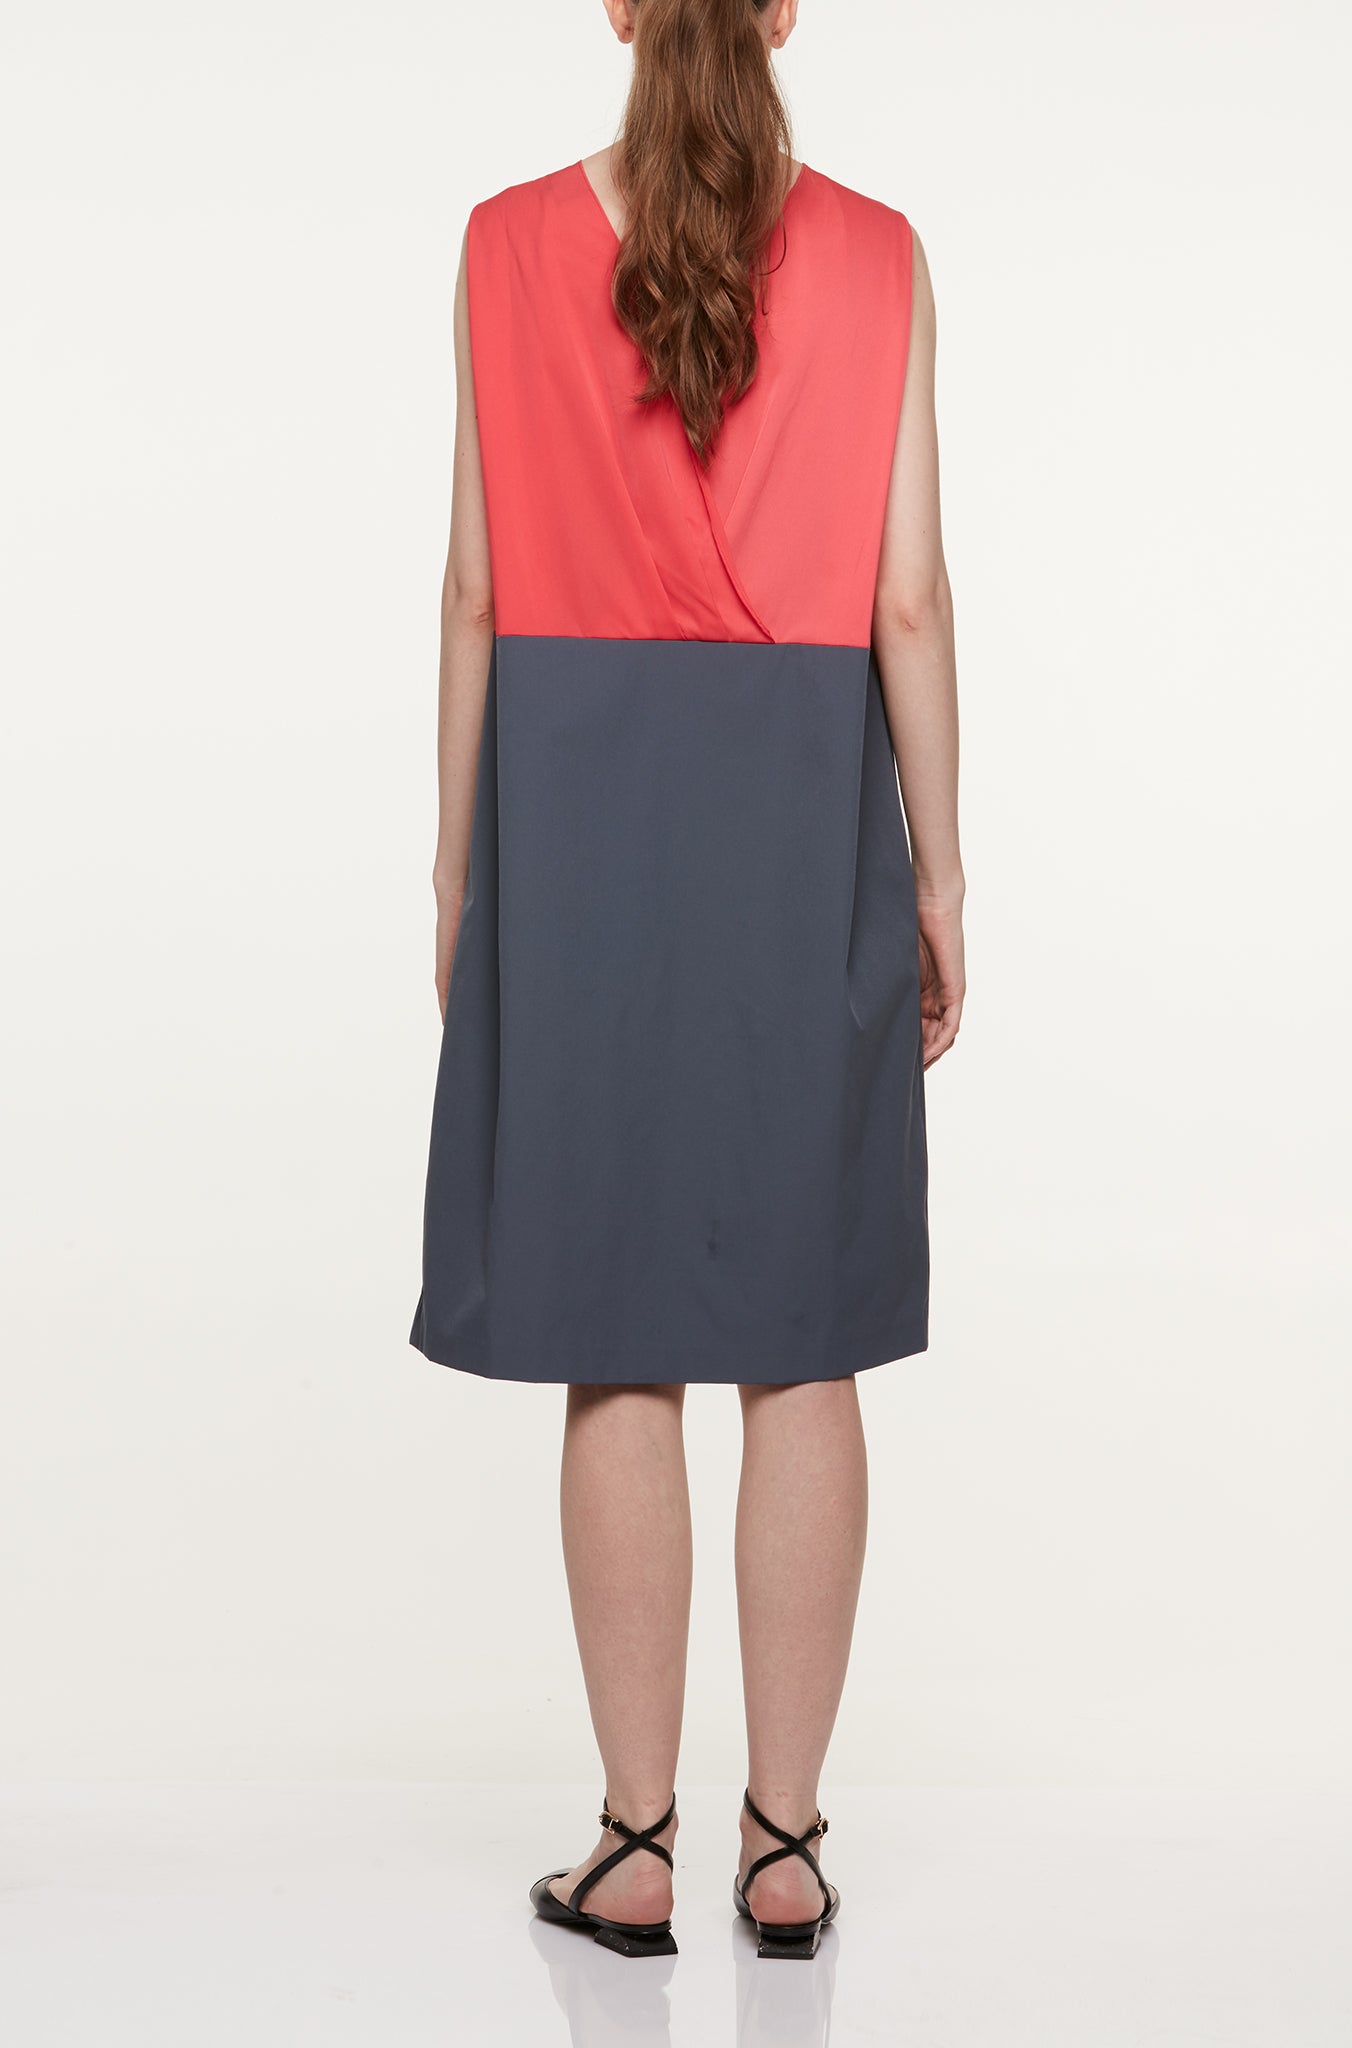 ROUND NECK DRESS WITH CONTRAST BACK PANEL